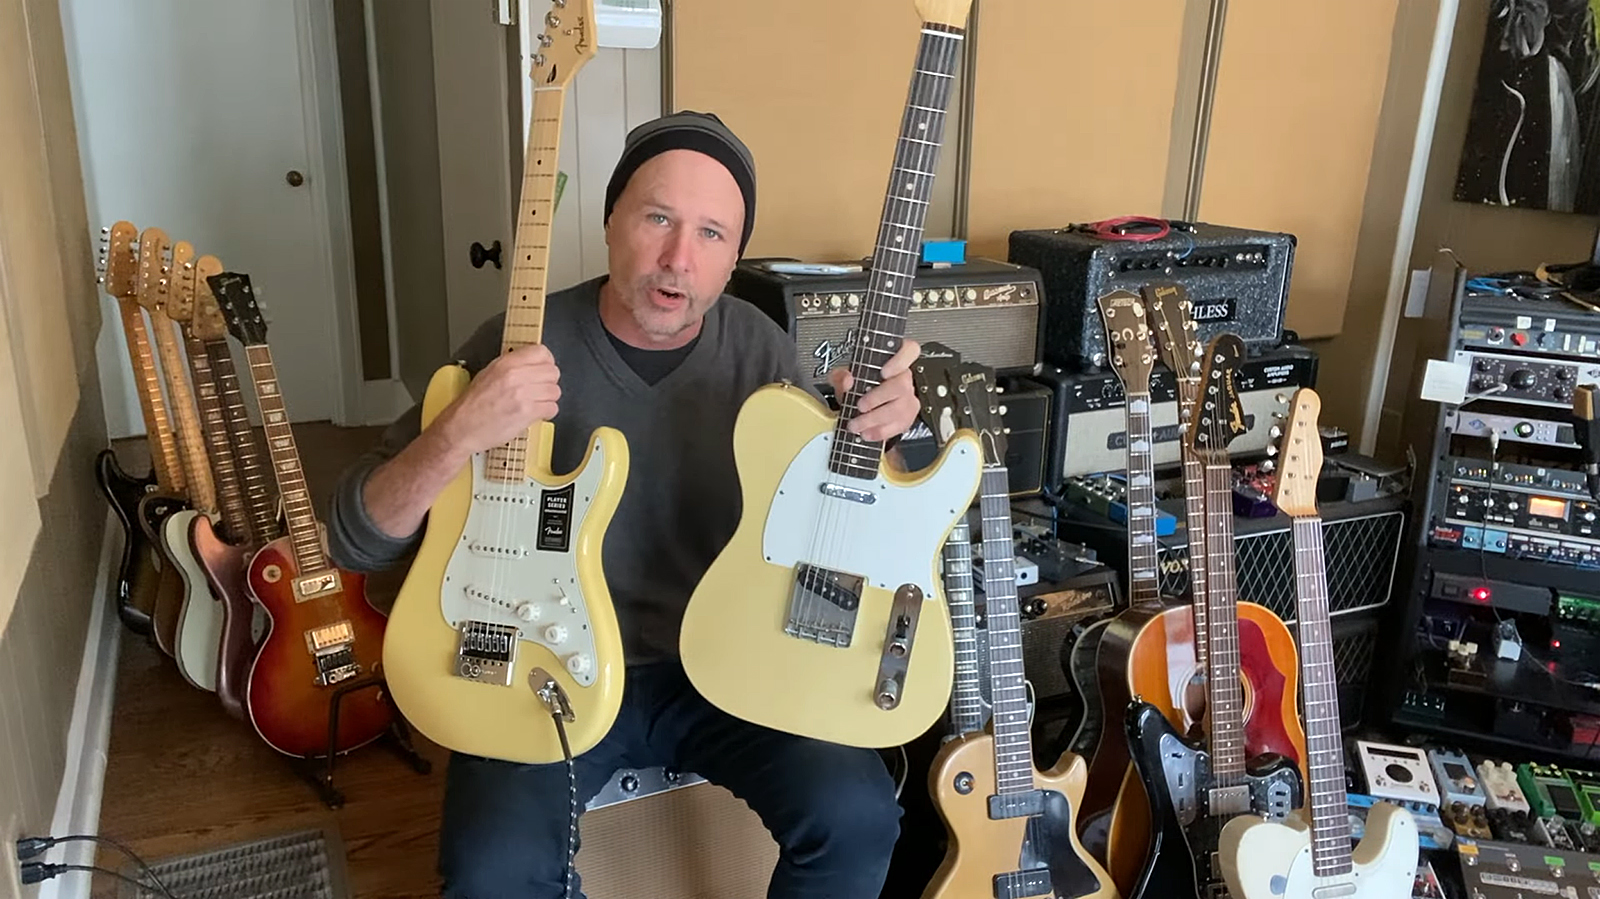 Jerry McPherson Awesome Unboxing Video • Fender Player Series Stratocaster Buttercream EverTune AfterMarket Upgrade versus all-original 1960 Telecaster that's currently out of tune